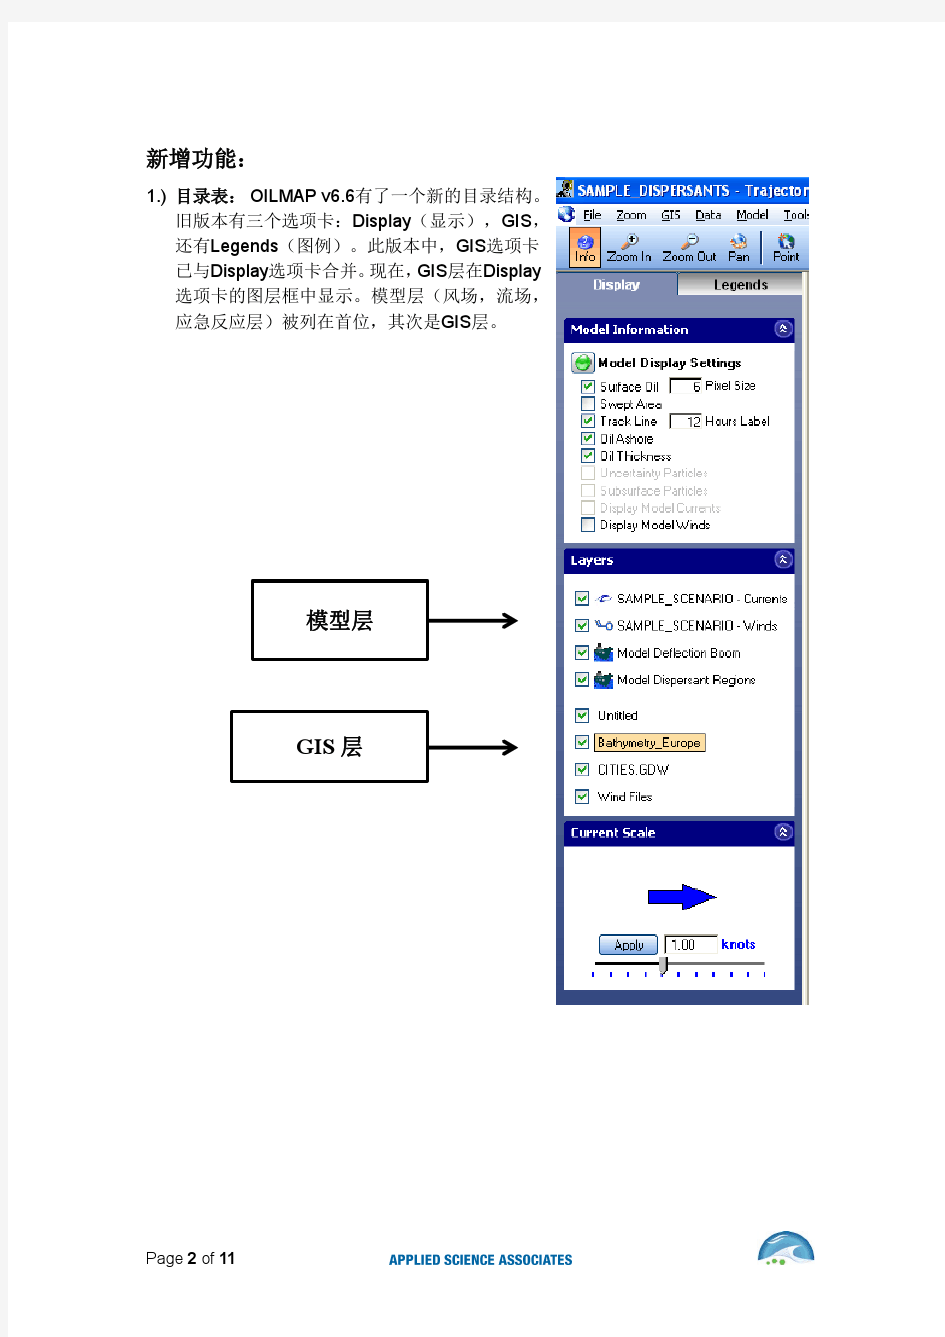 OILMAPV6.6 Release Notes_Chinese